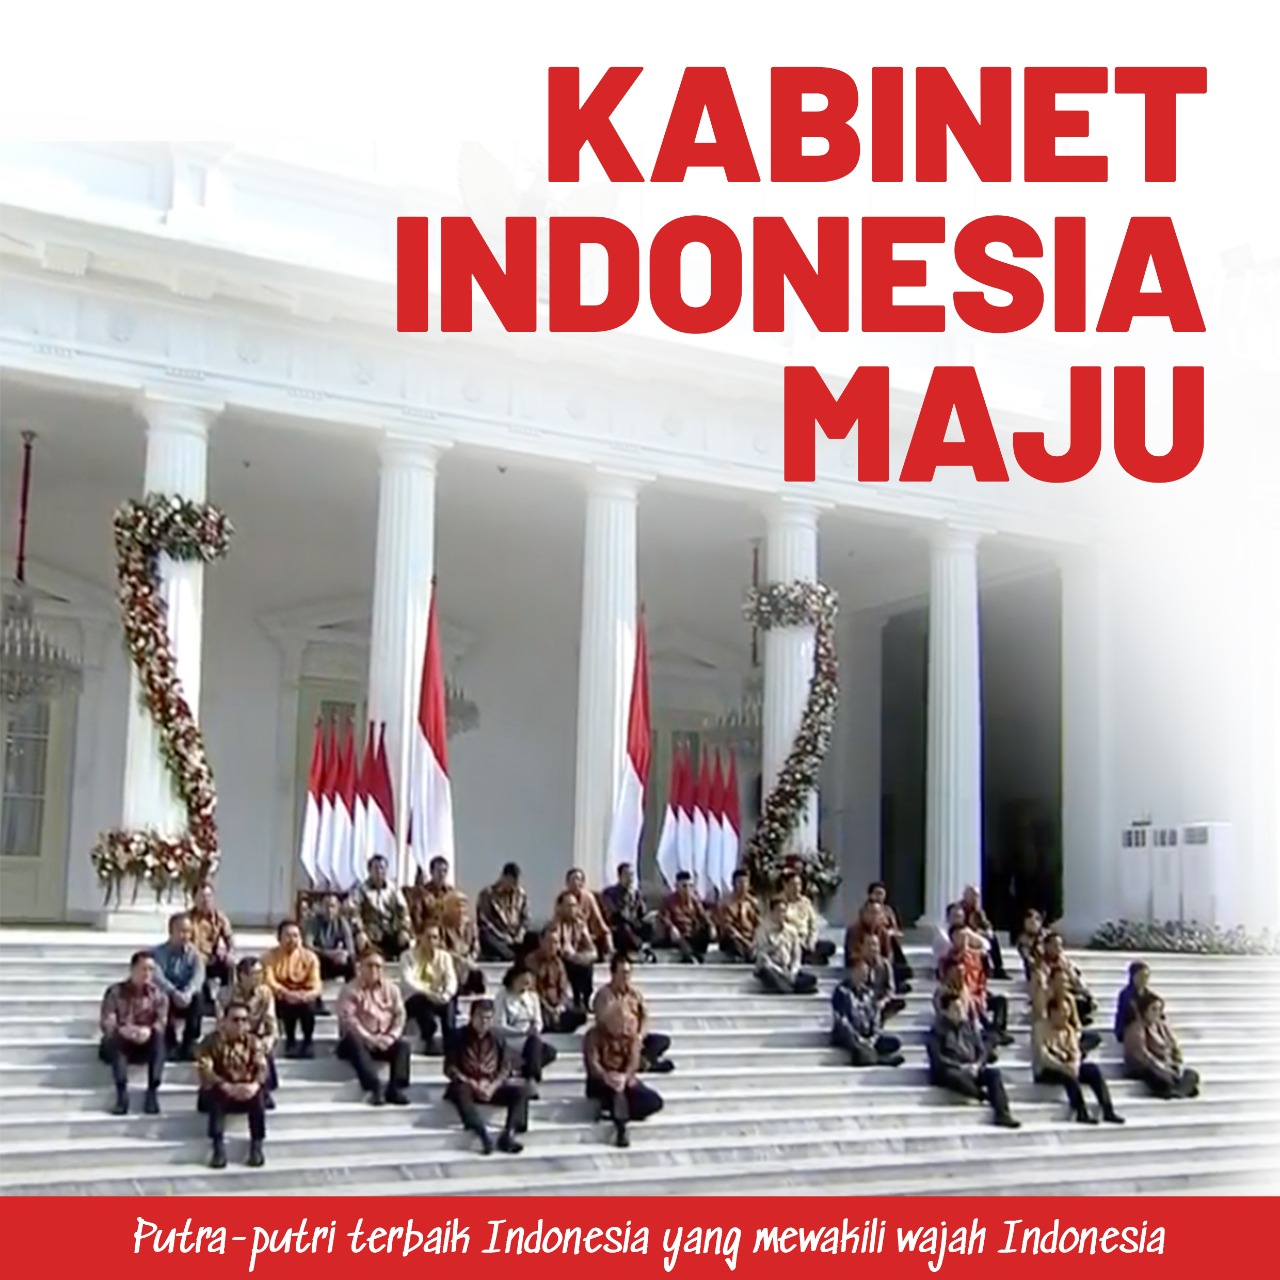 You are currently viewing Kabinet Indonesia Maju